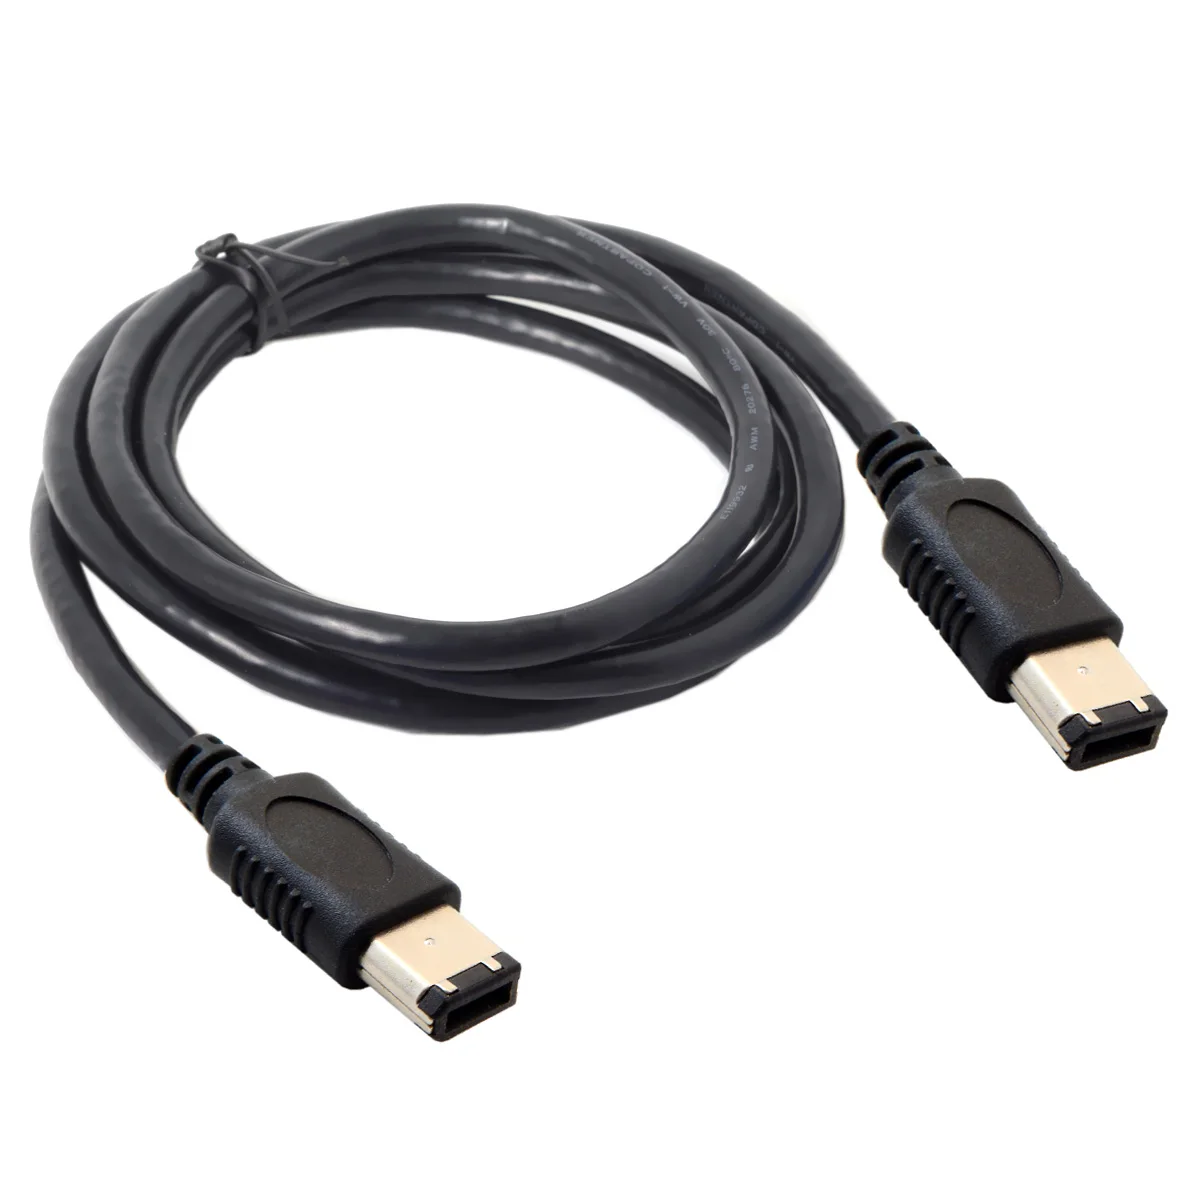 

Chenyang FW-016-1.8M 6 Pin 6pin IEEE 1394 IEEE 1394 Firewire 400 6 6 iLink Cable IEEE 1394 1.8M Black